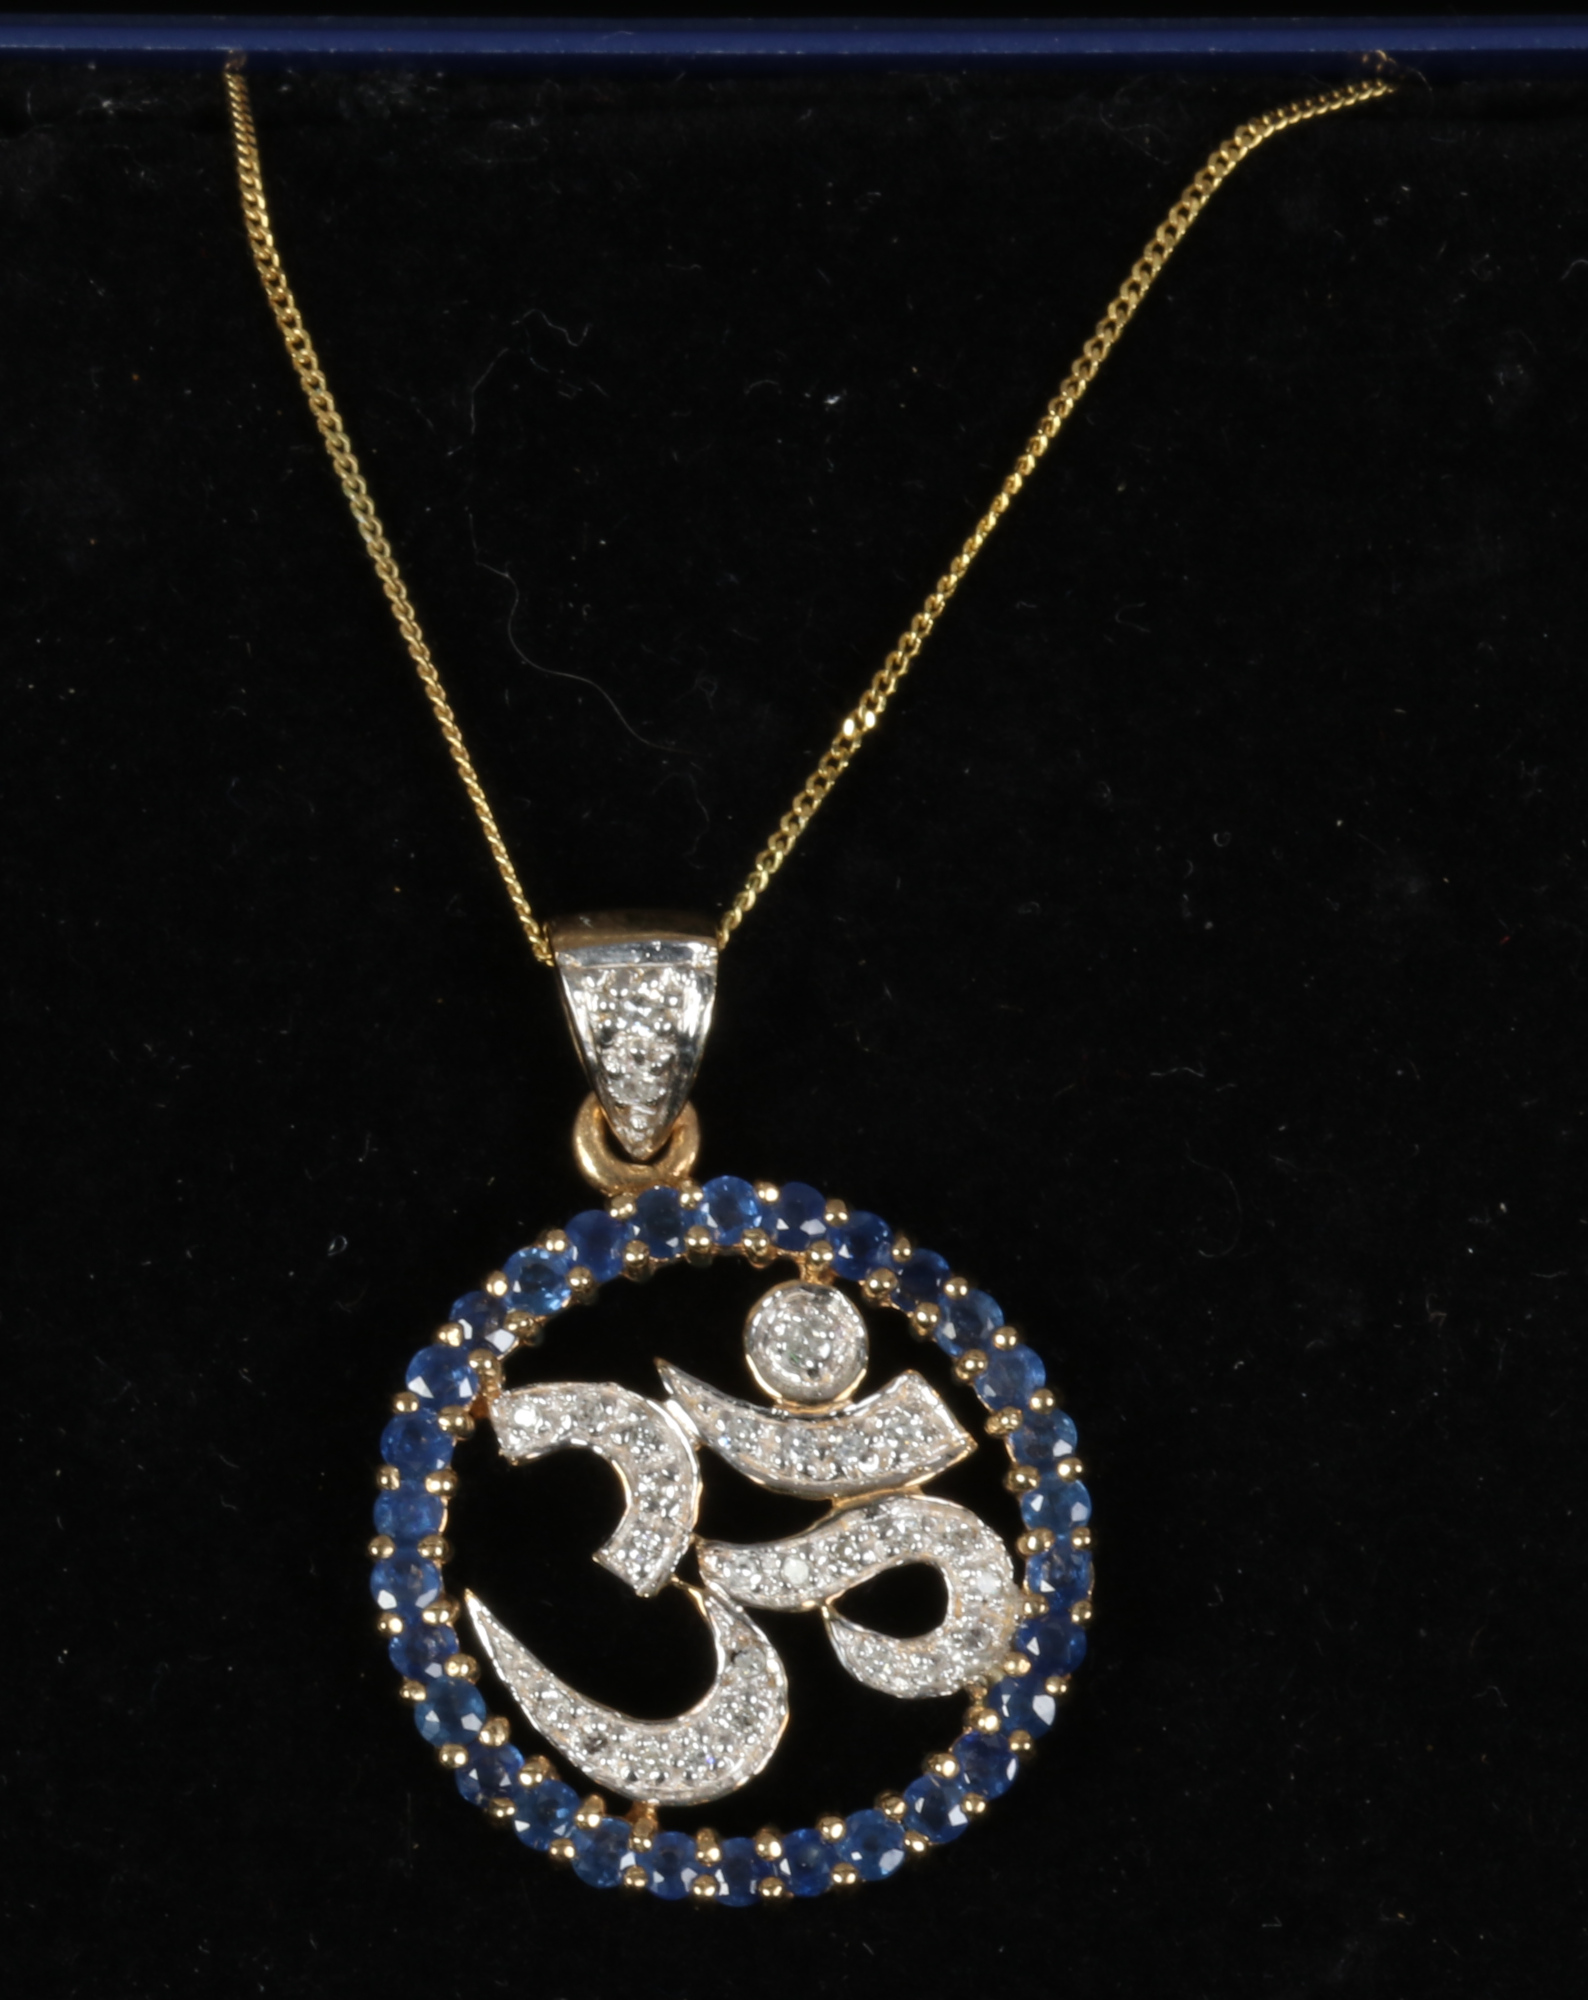 A 9ct gold pendant chain, set with sapphire and diamond to form the Sanskrit OM symbol.